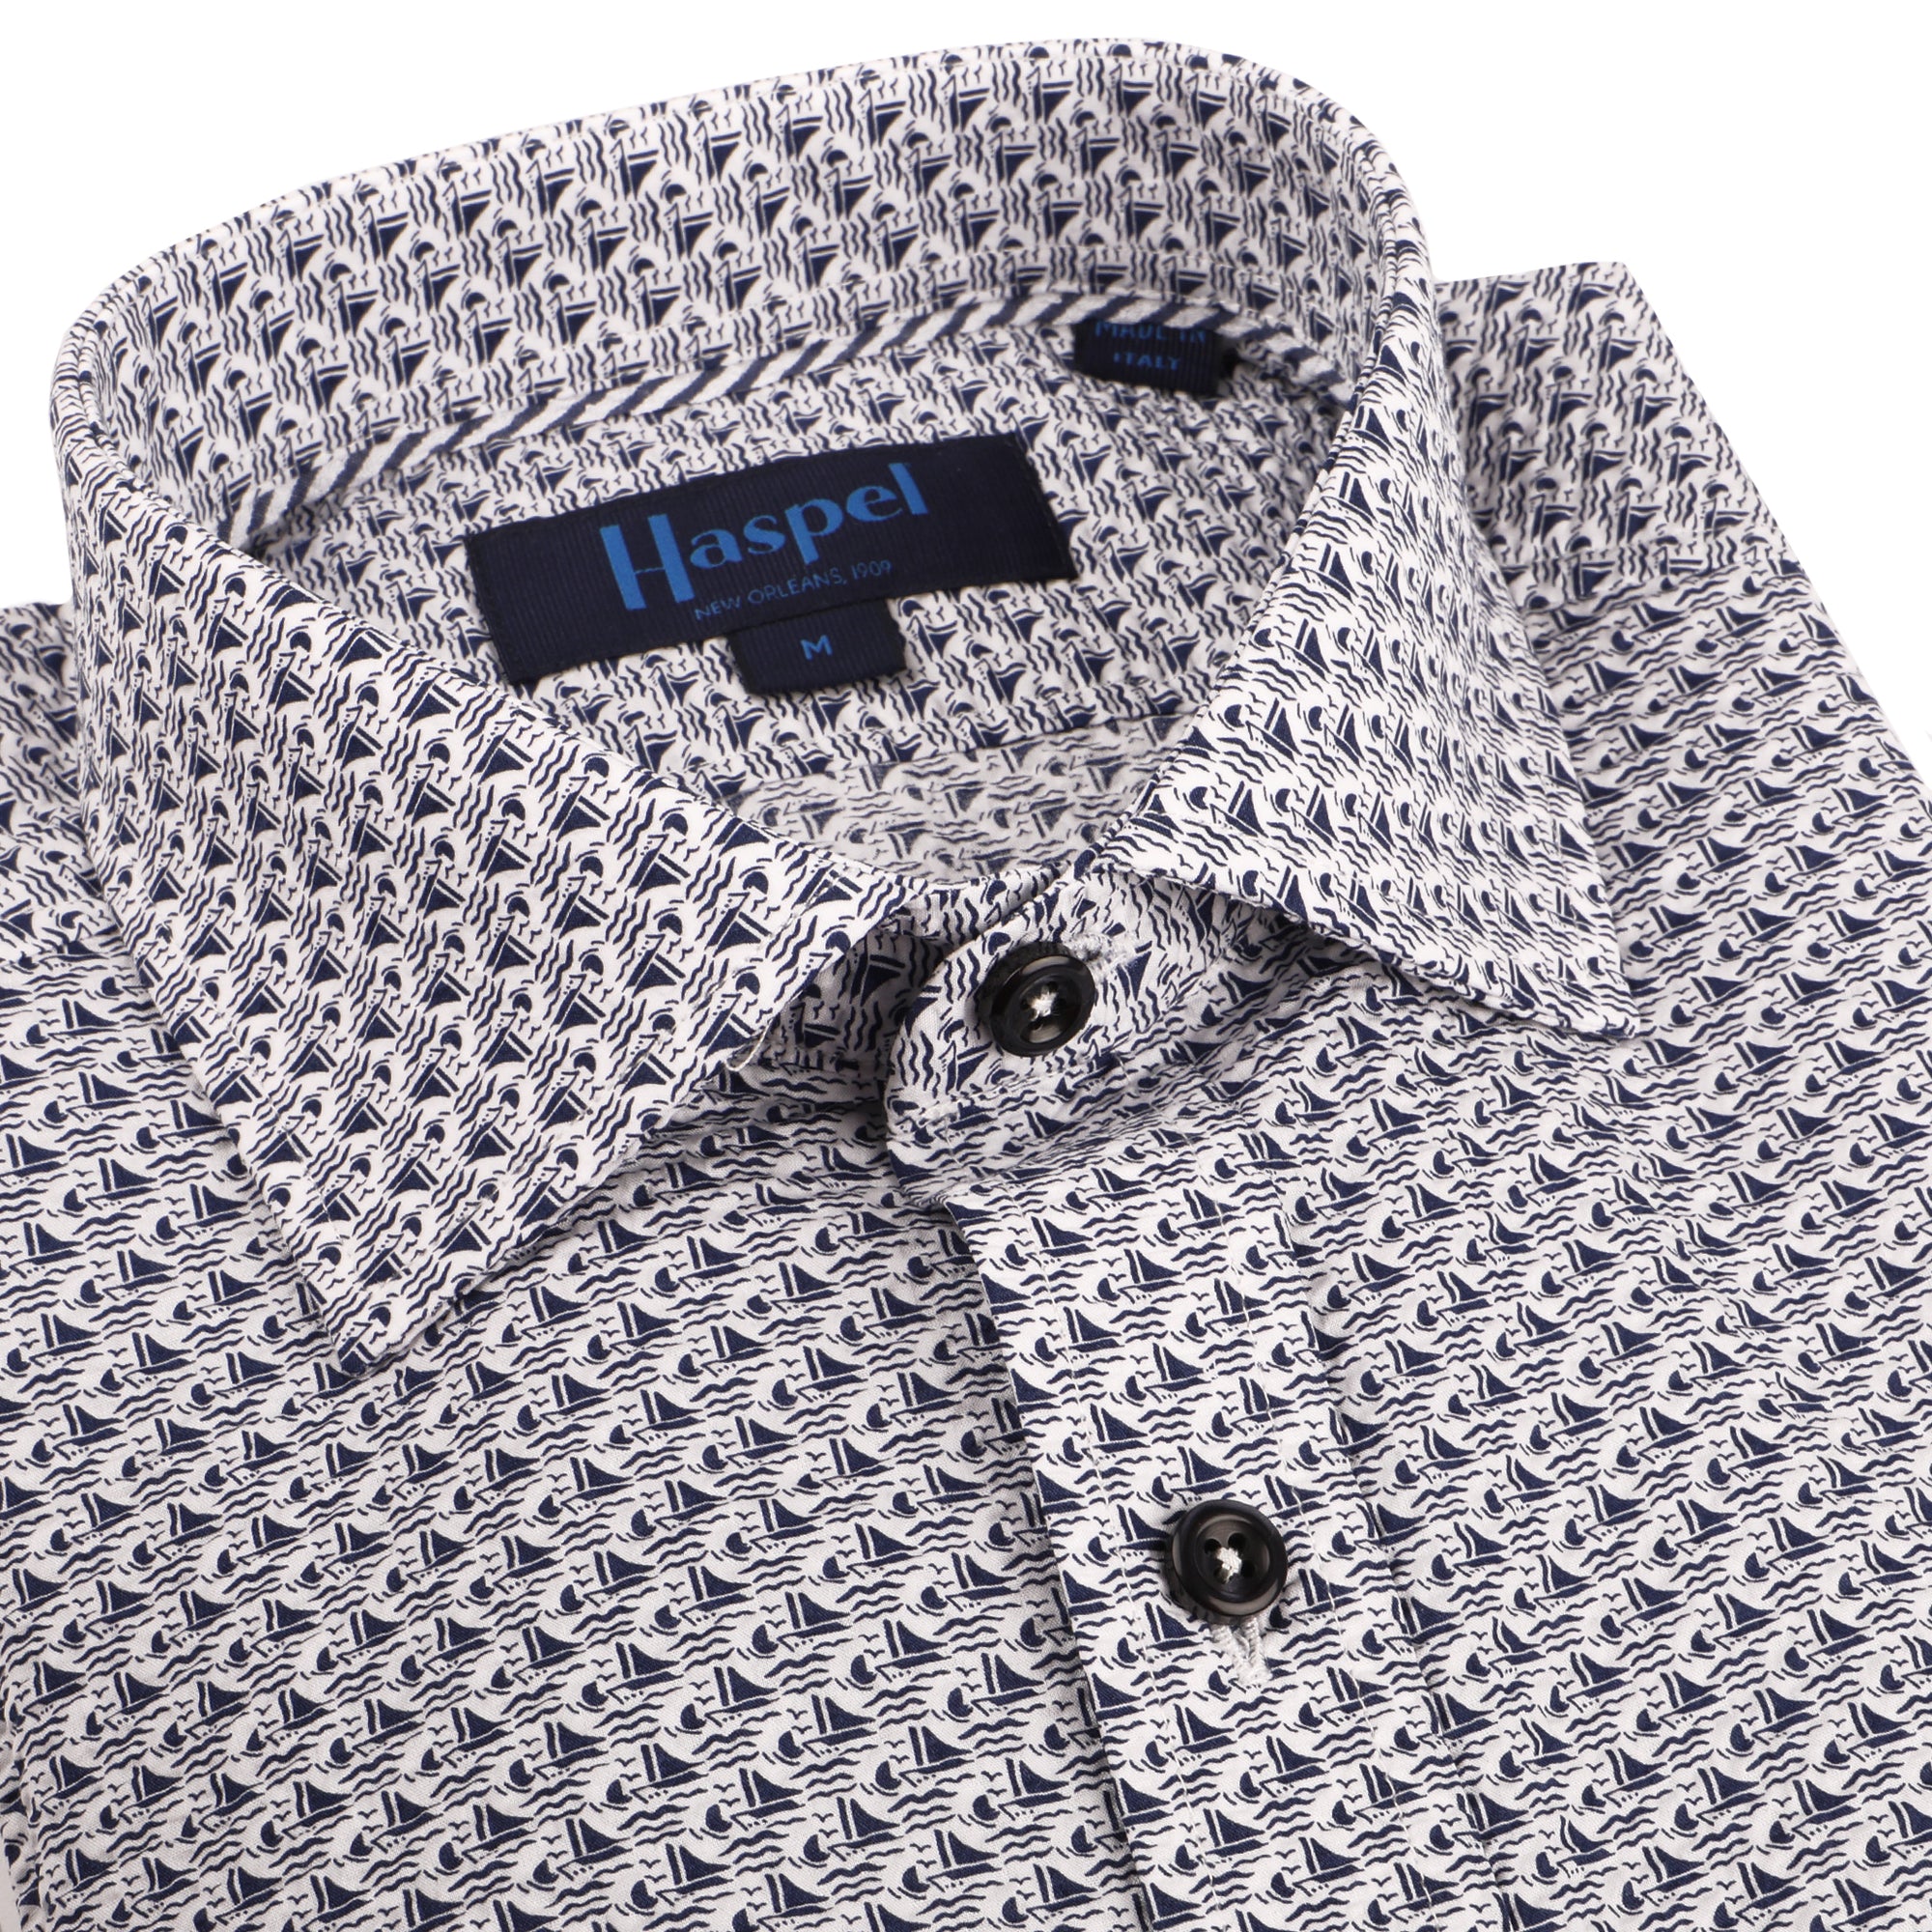 Seersucker and sailboats. What more could a nautical gentleman want? Preppy, lightweight and cool to the max.   100% Cotton Seersucker ‚óç Spread Collar With Removable Stays ‚óç Long Sleeve ‚óç Chest Pocket ‚óç Machine Washable ‚óç Made in Italy